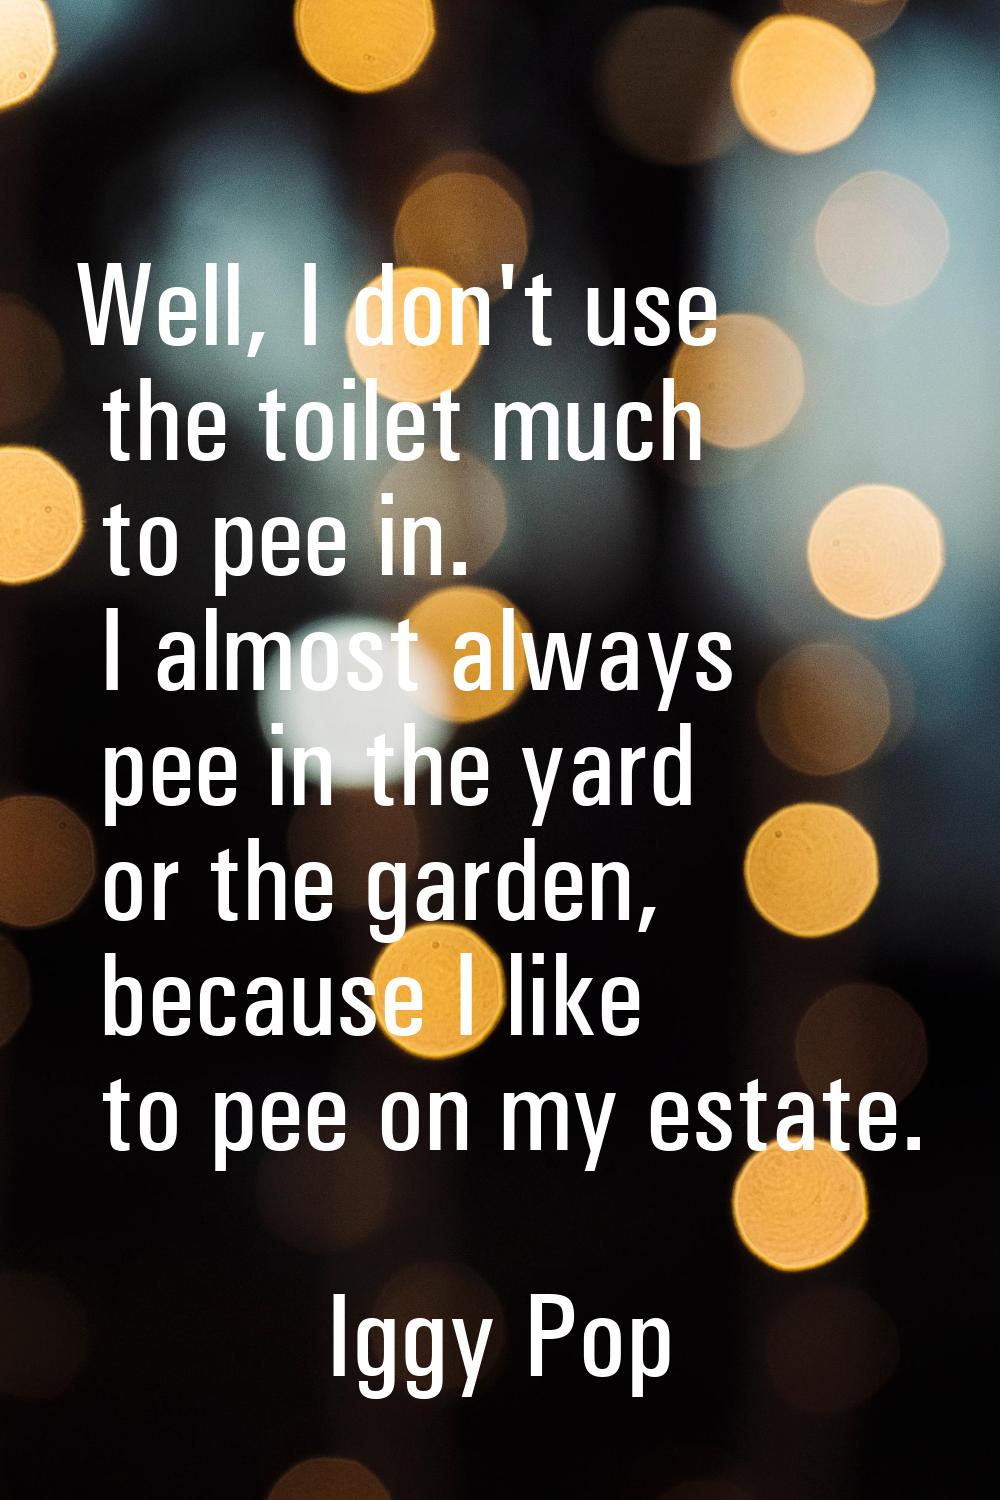 Well, I don't use the toilet much to pee in. I almost always pee in the yard or the garden, because